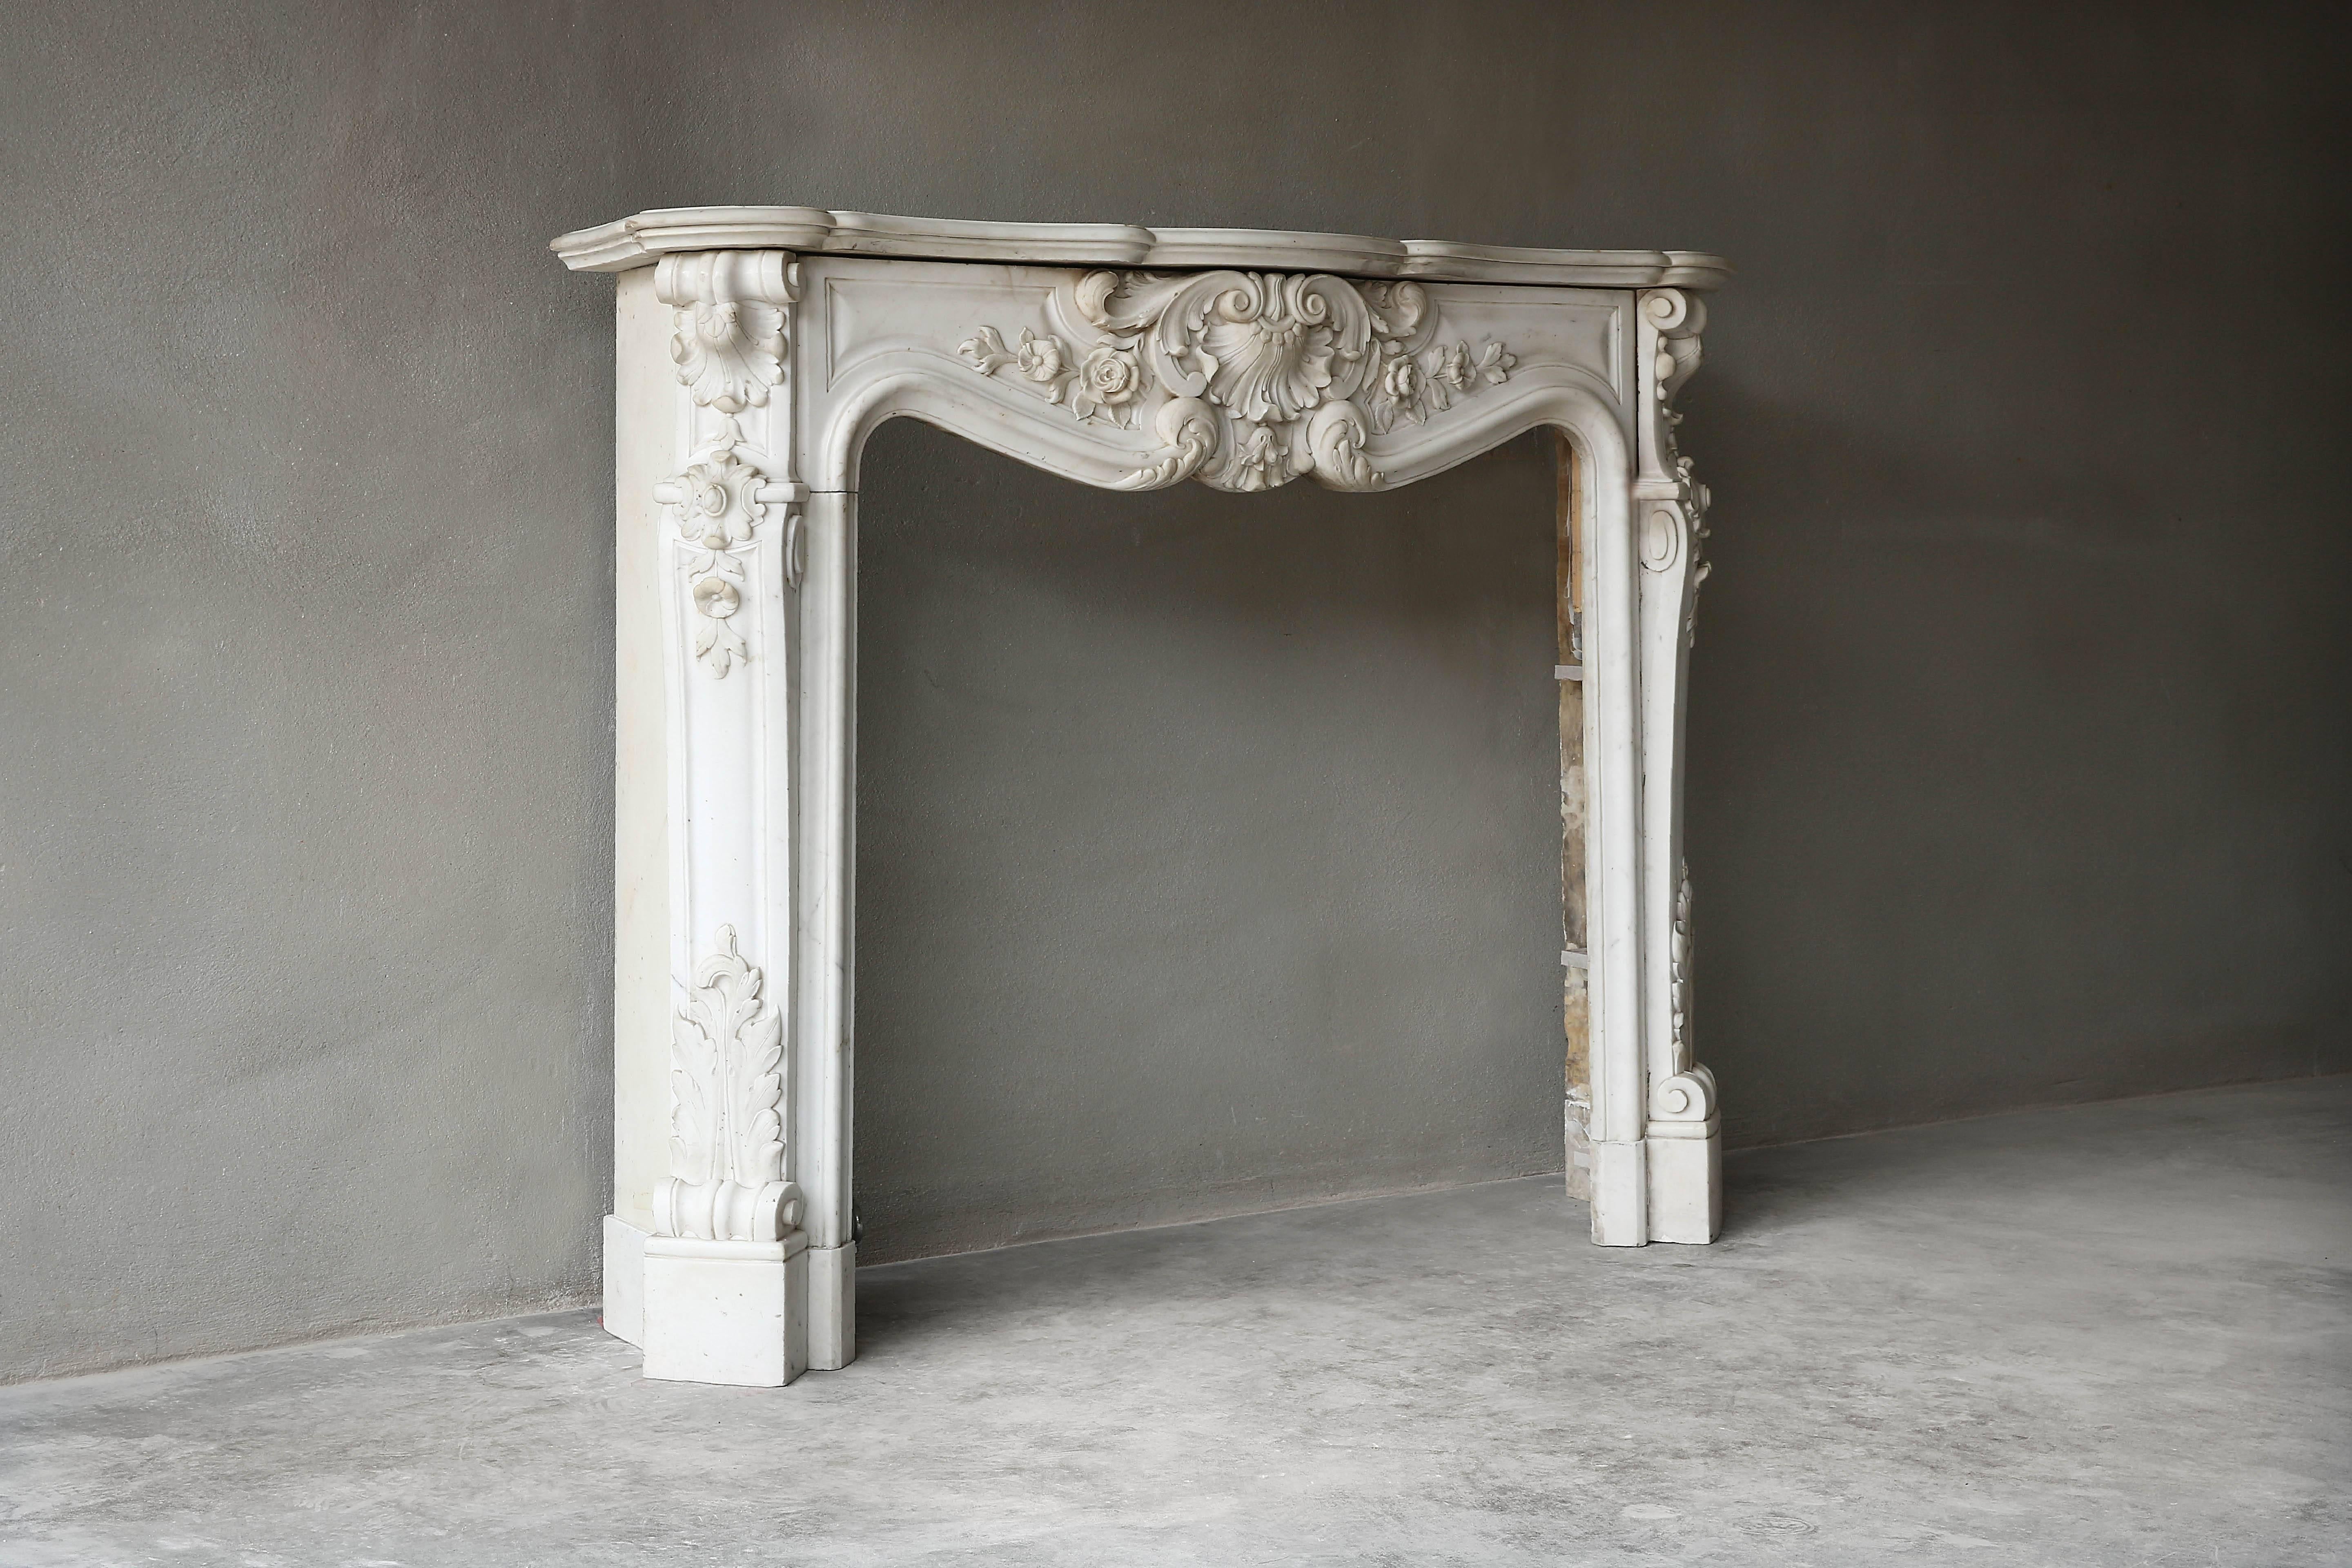 Decorated antique fireplace of white statuario marble in the style of Louis XV from the period 1880-1910. The artist Michelangelo regularly visited the Italian village of Carrara to get this pure white marble out of the quarries and make beautiful